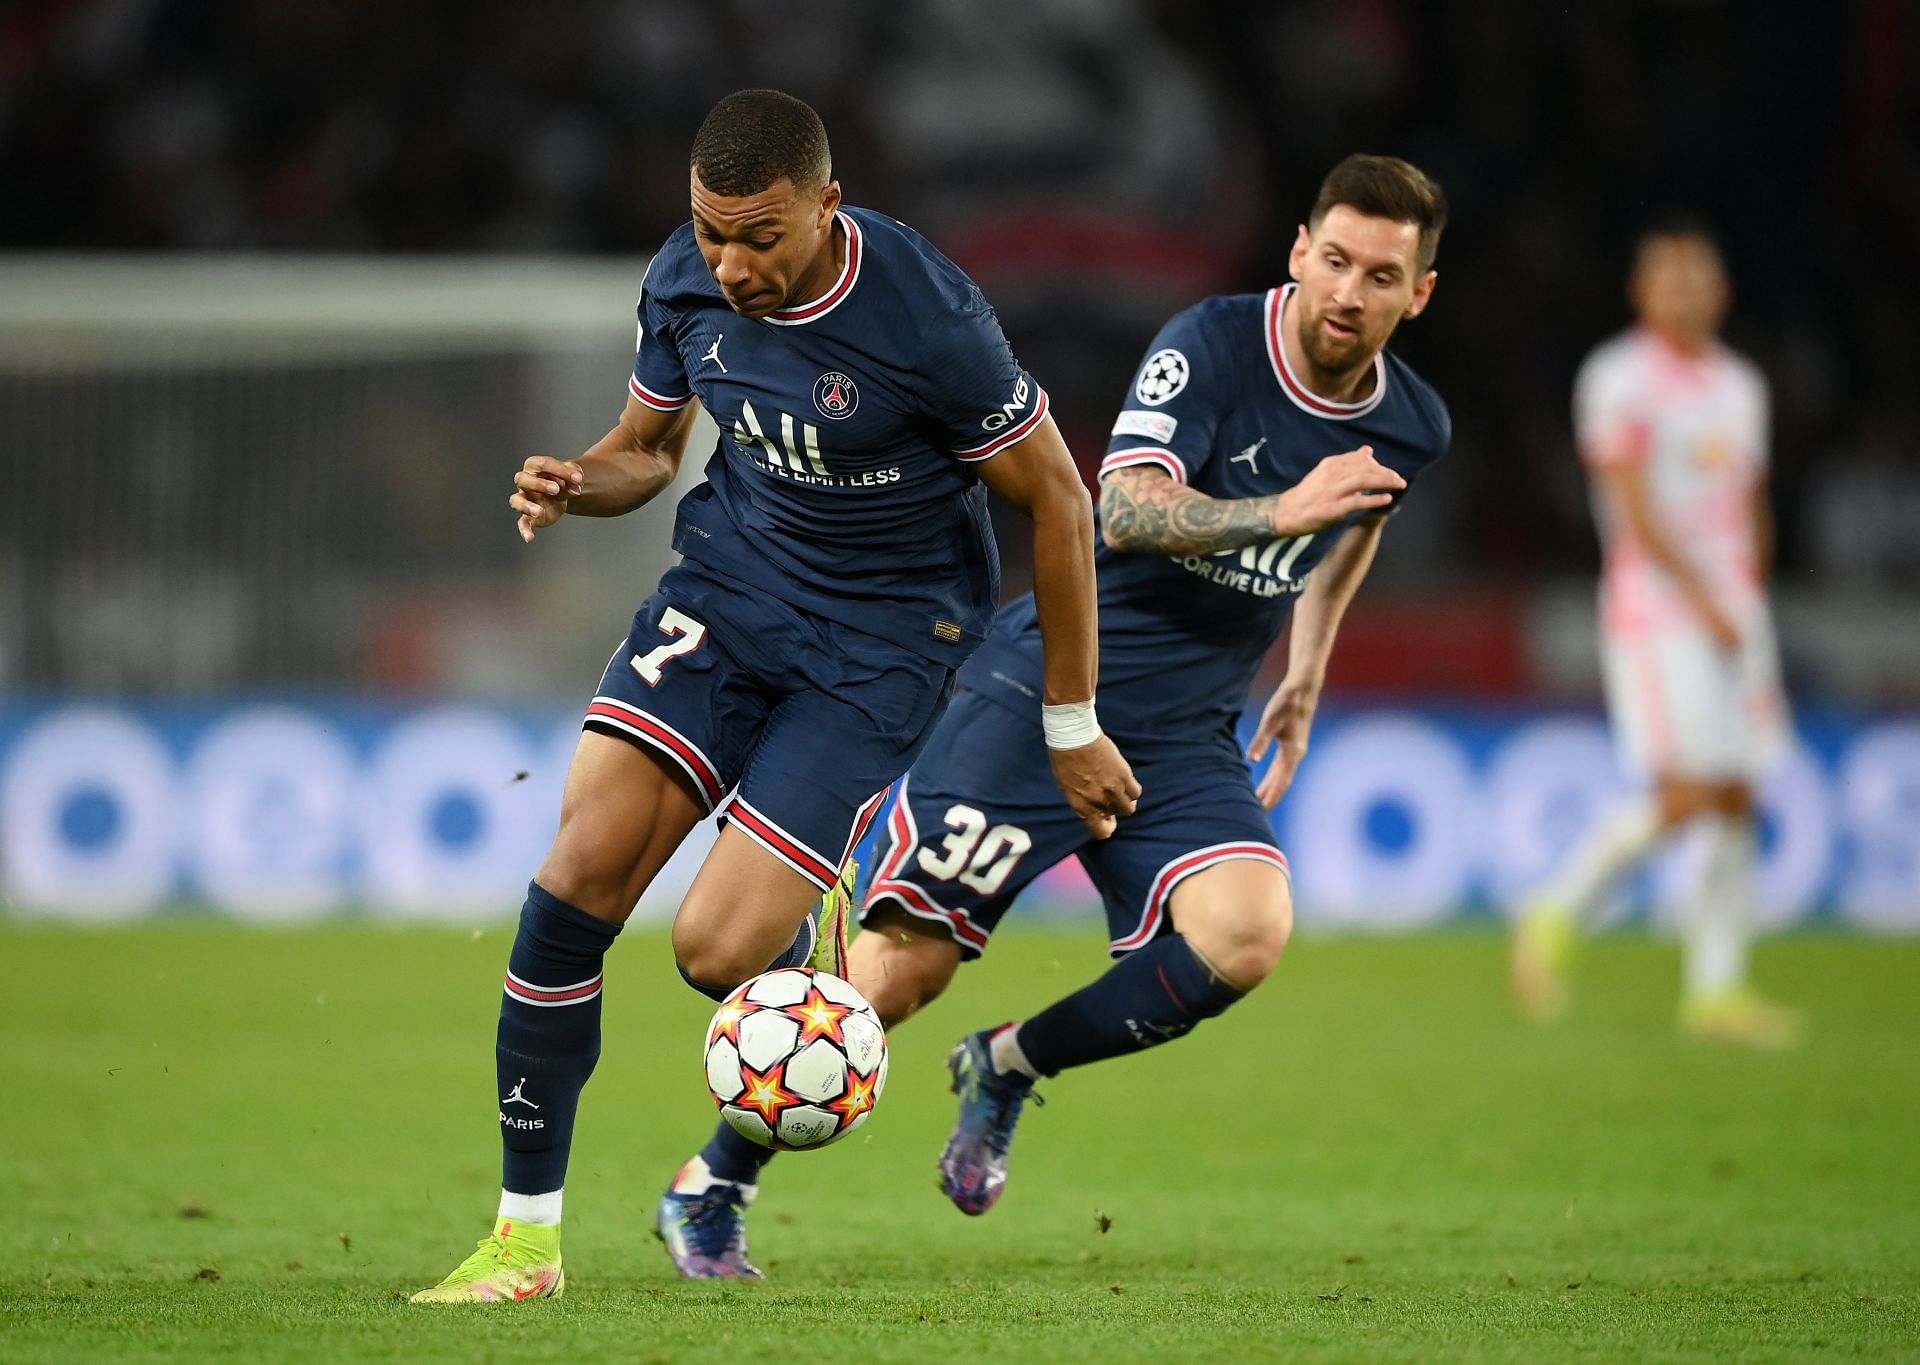 Lionel Messi and Kylian Mbappe in action for the Parisians